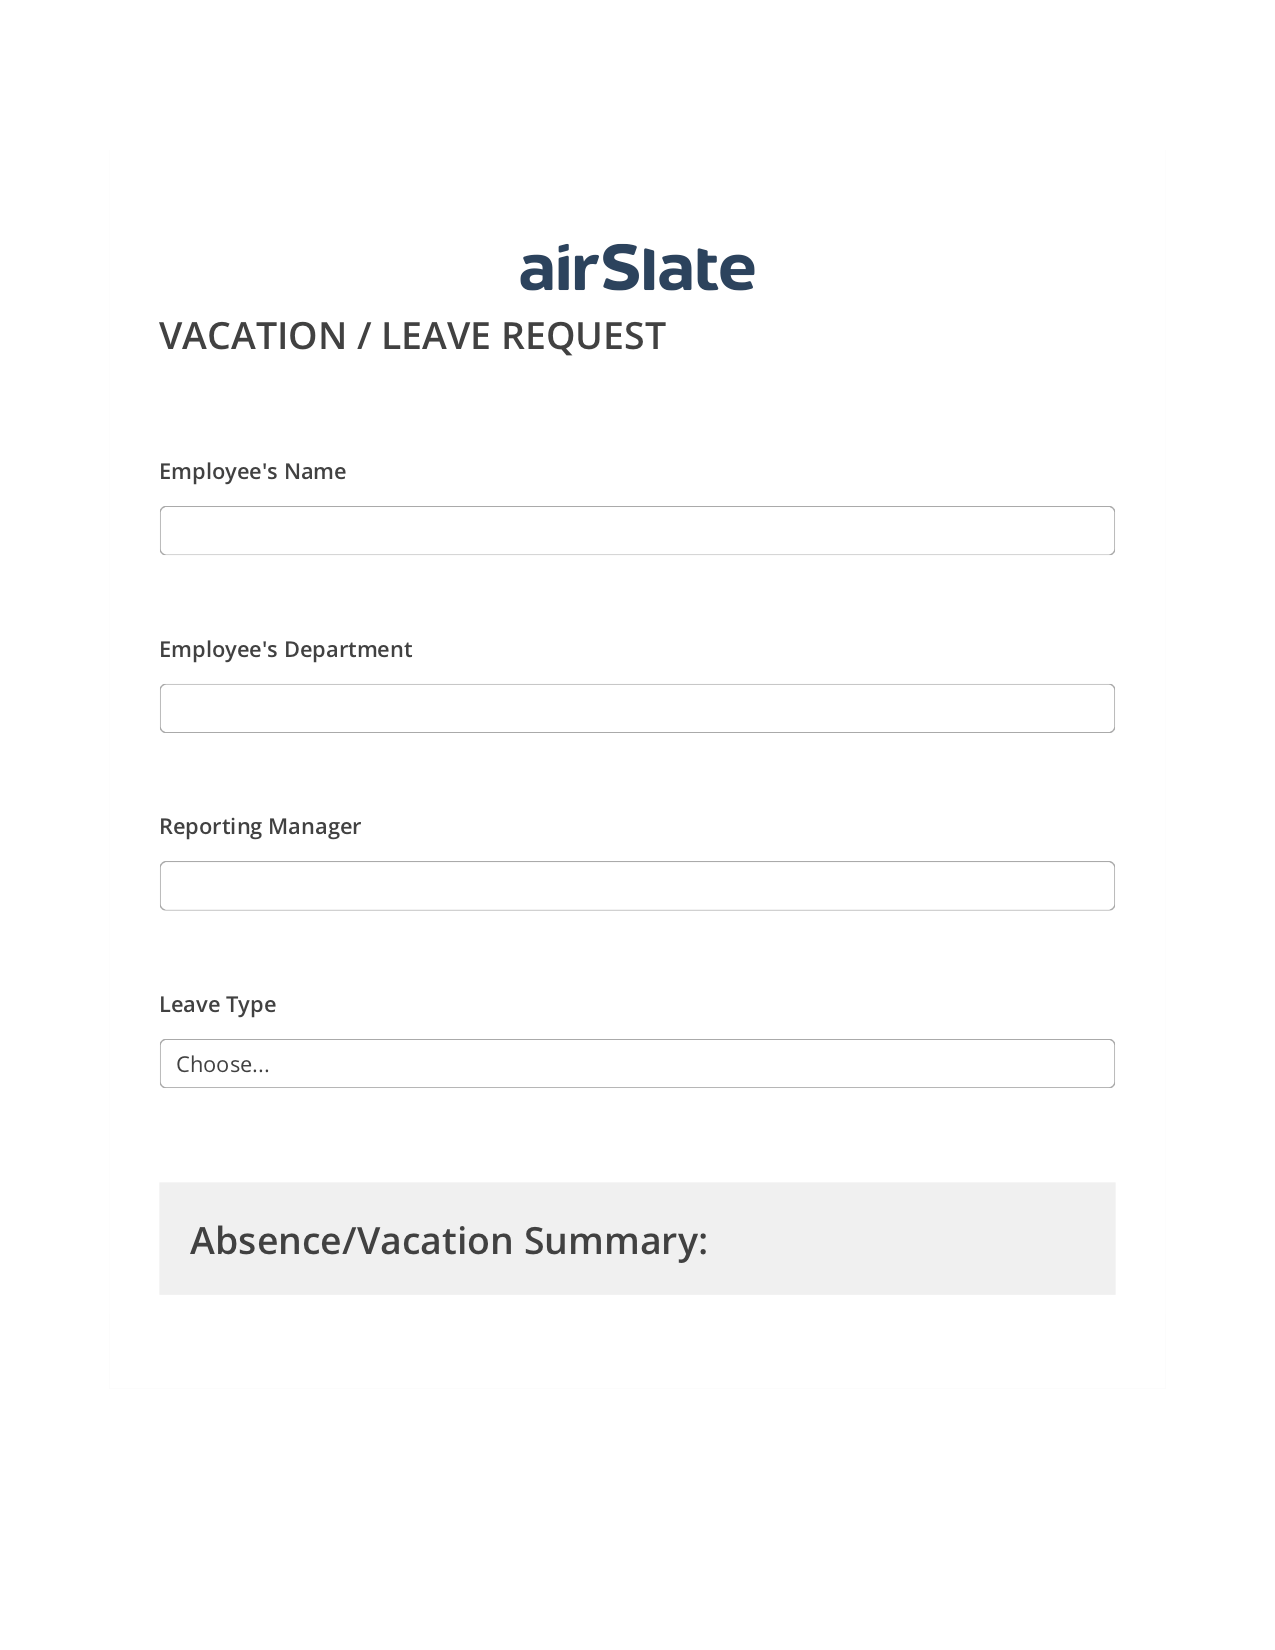 Multirole Vacation/Leave Request Workflow Pre-fill from Salesforce Records Bot, Slack Notification Bot, Export to Smartsheet